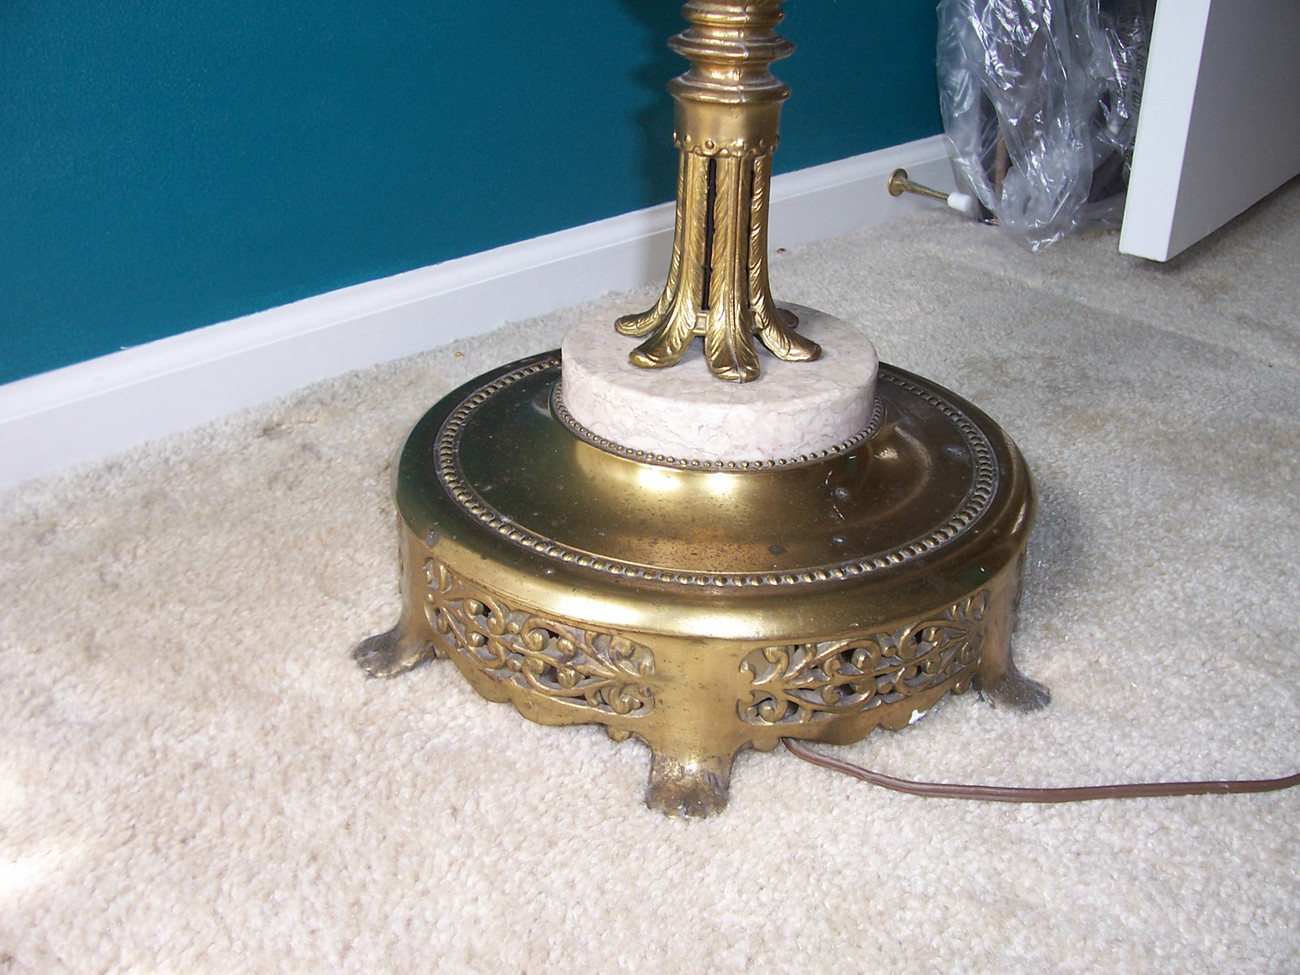 Antique Brass and Marble Base Floor Lamp with Decorative Finial - Floor